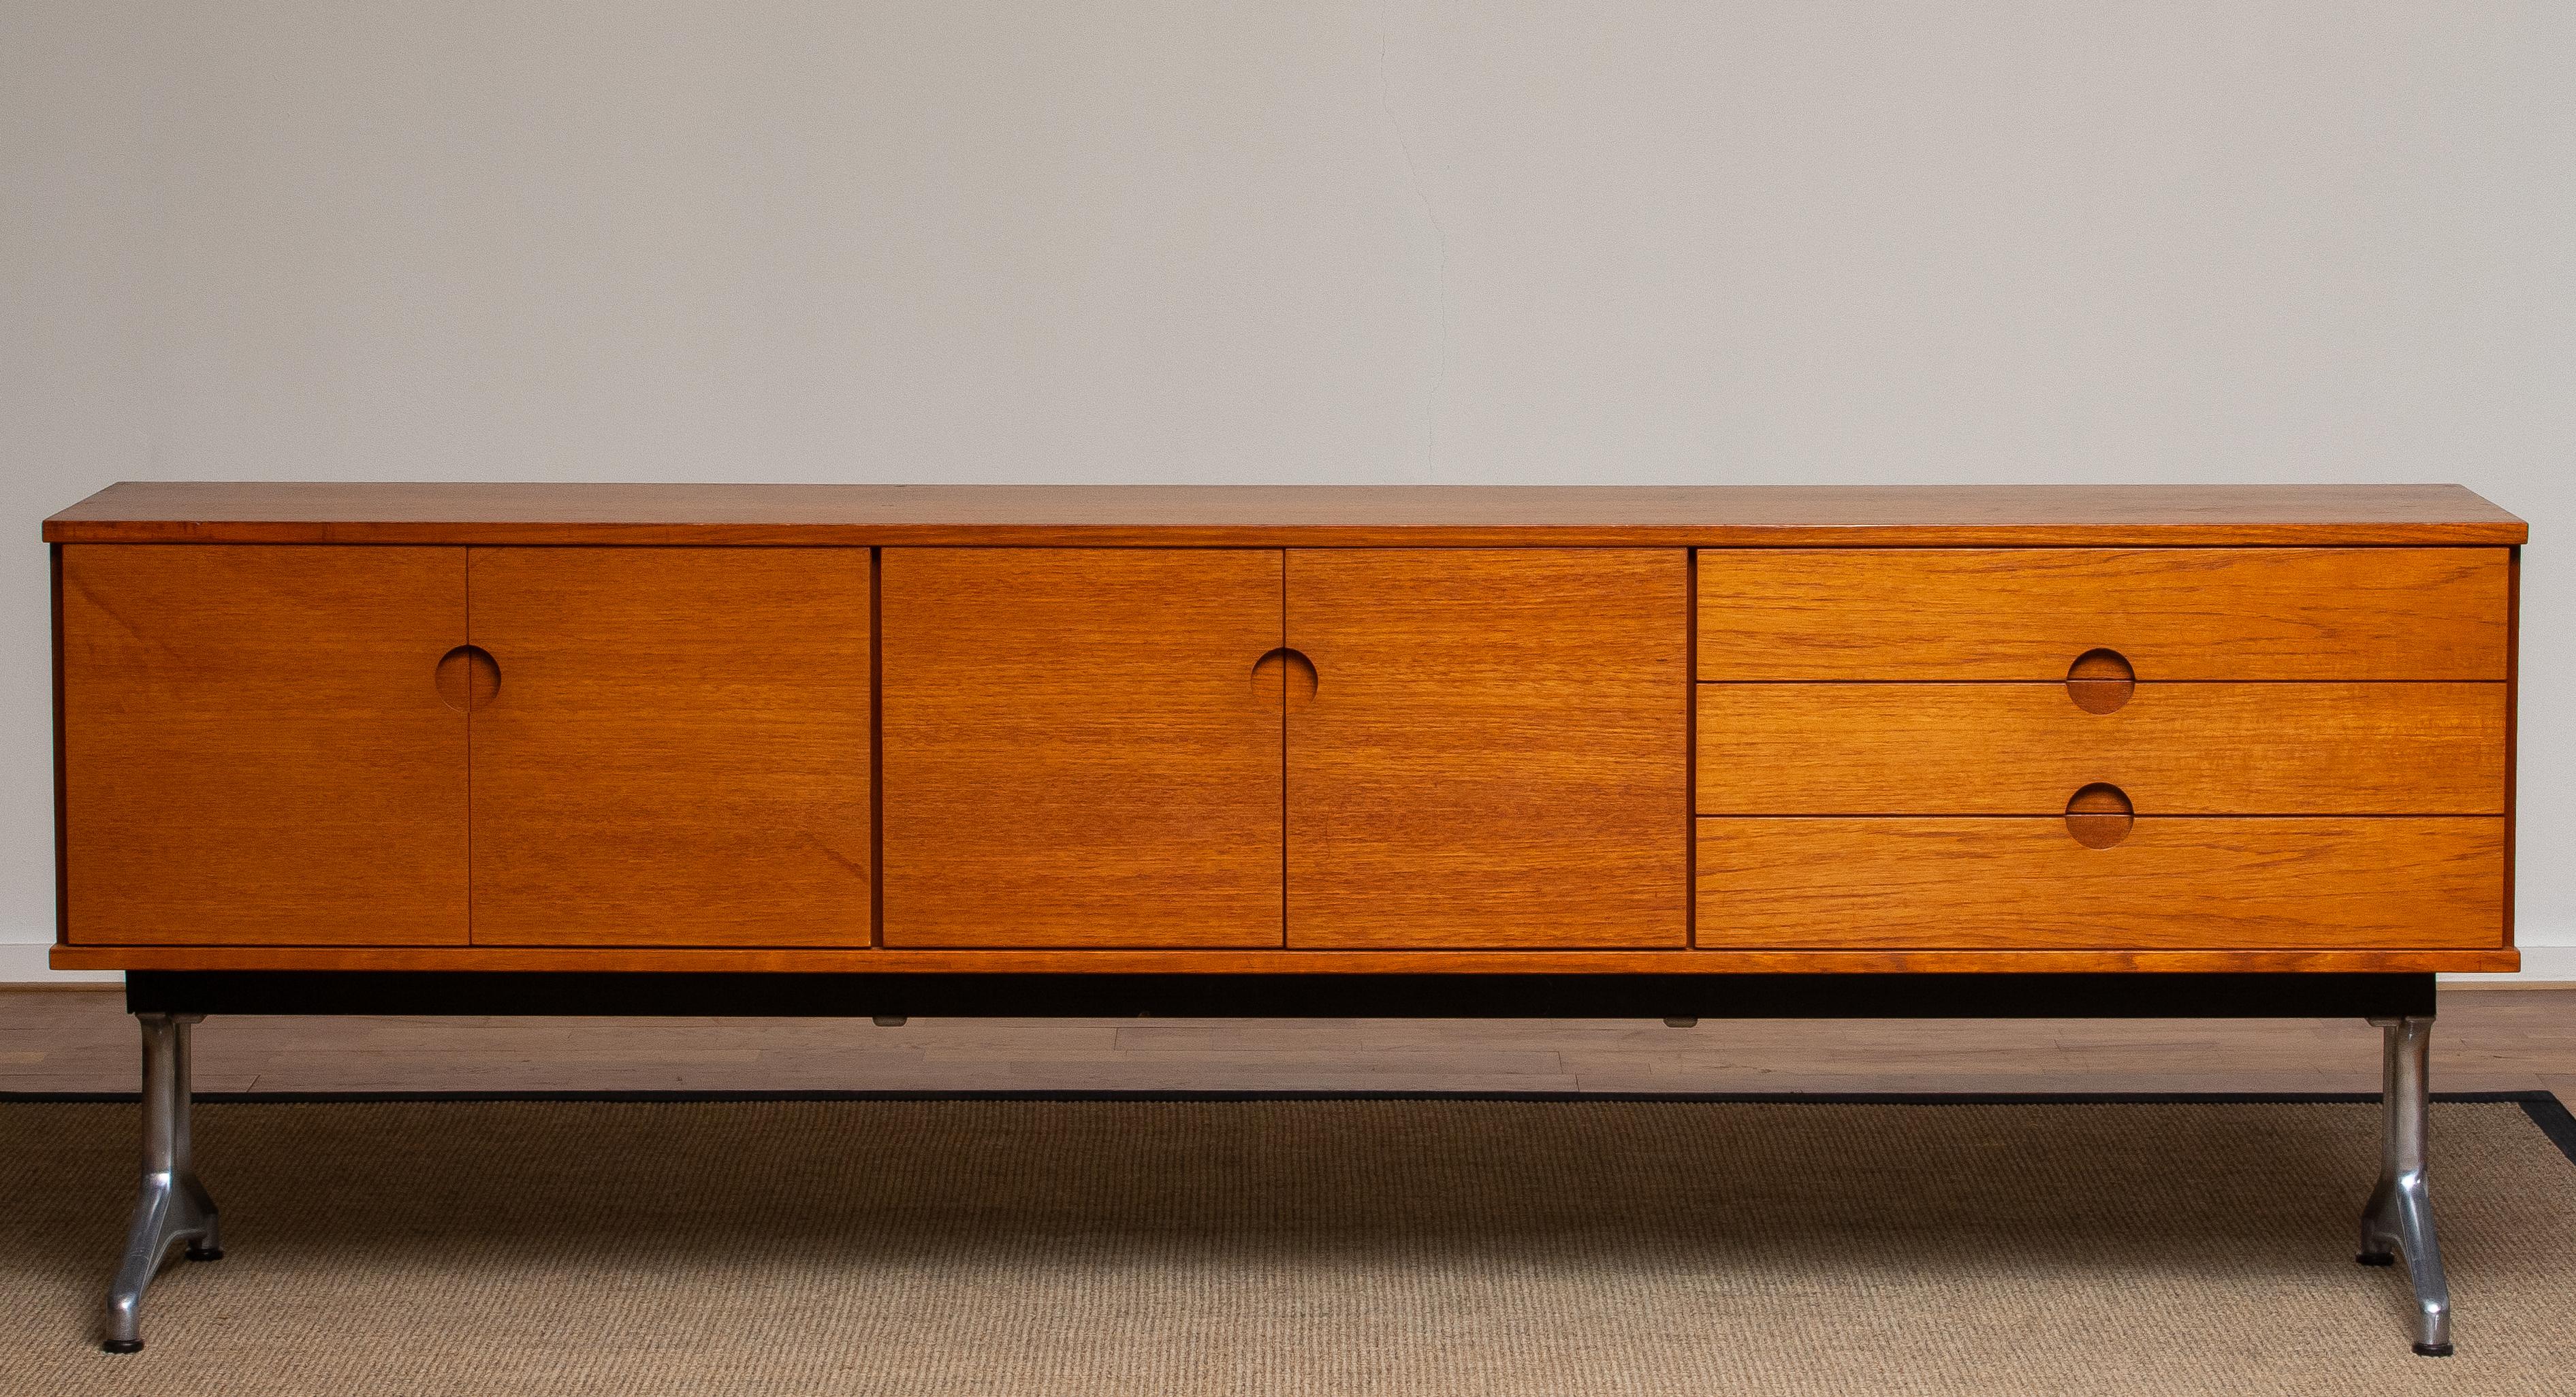 1960s Sideboard / Credenzas in Teak on a Aluminum Stand by Pertti Salmi, Norway 4